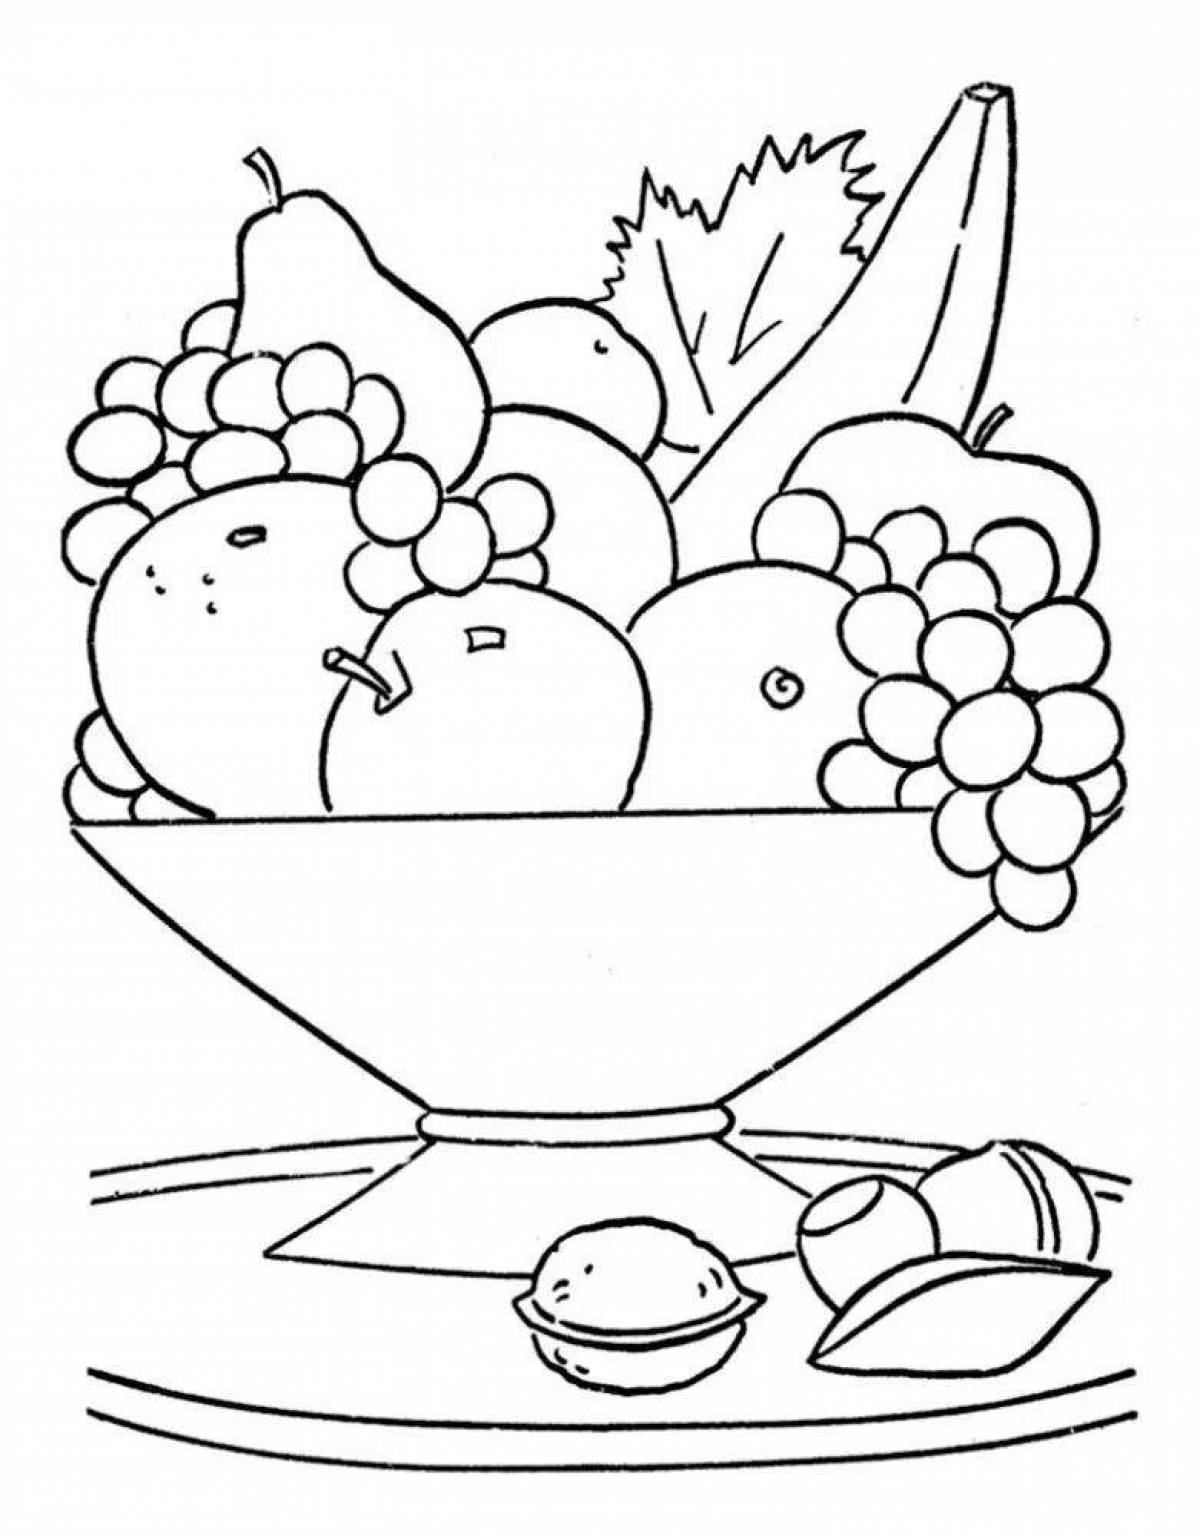 Coloring book bold fruit plate